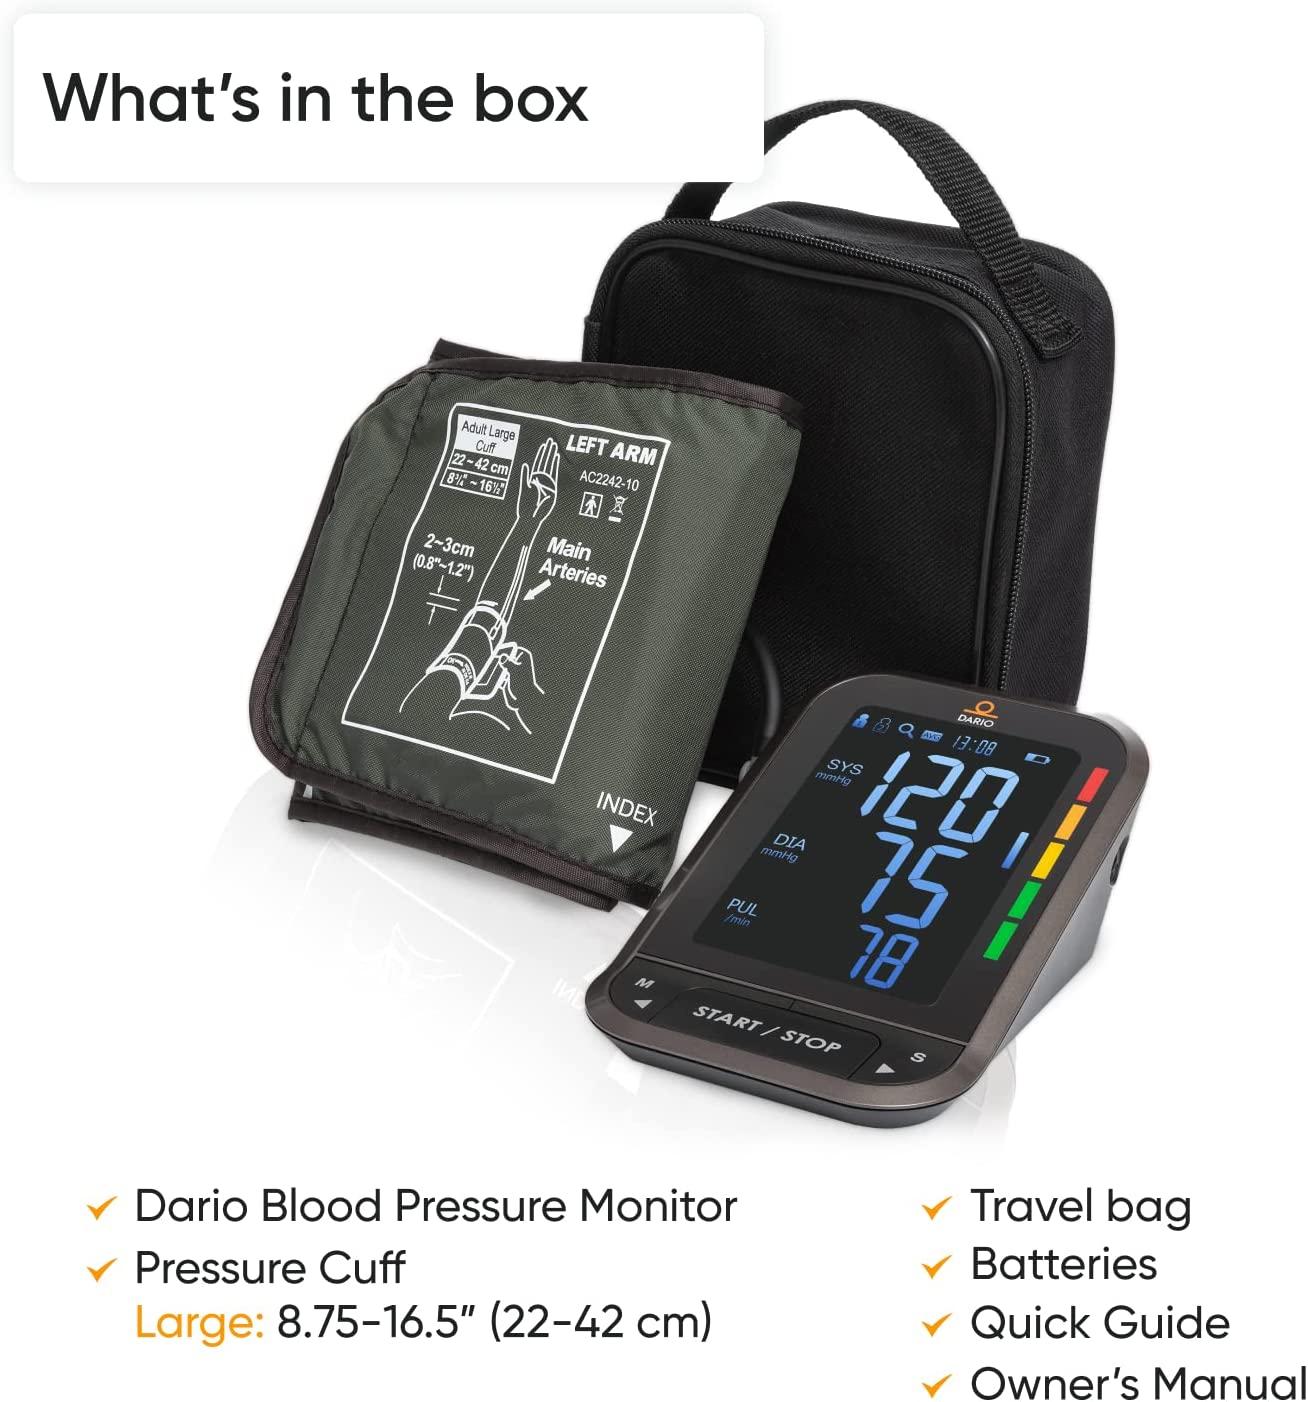 DARIO Blood Pressure Monitor  Accurate BP Machine with Adjustable Cuff  (8.75-16.5in) & Carry Case - Unlimited Readings via Bluetooth App